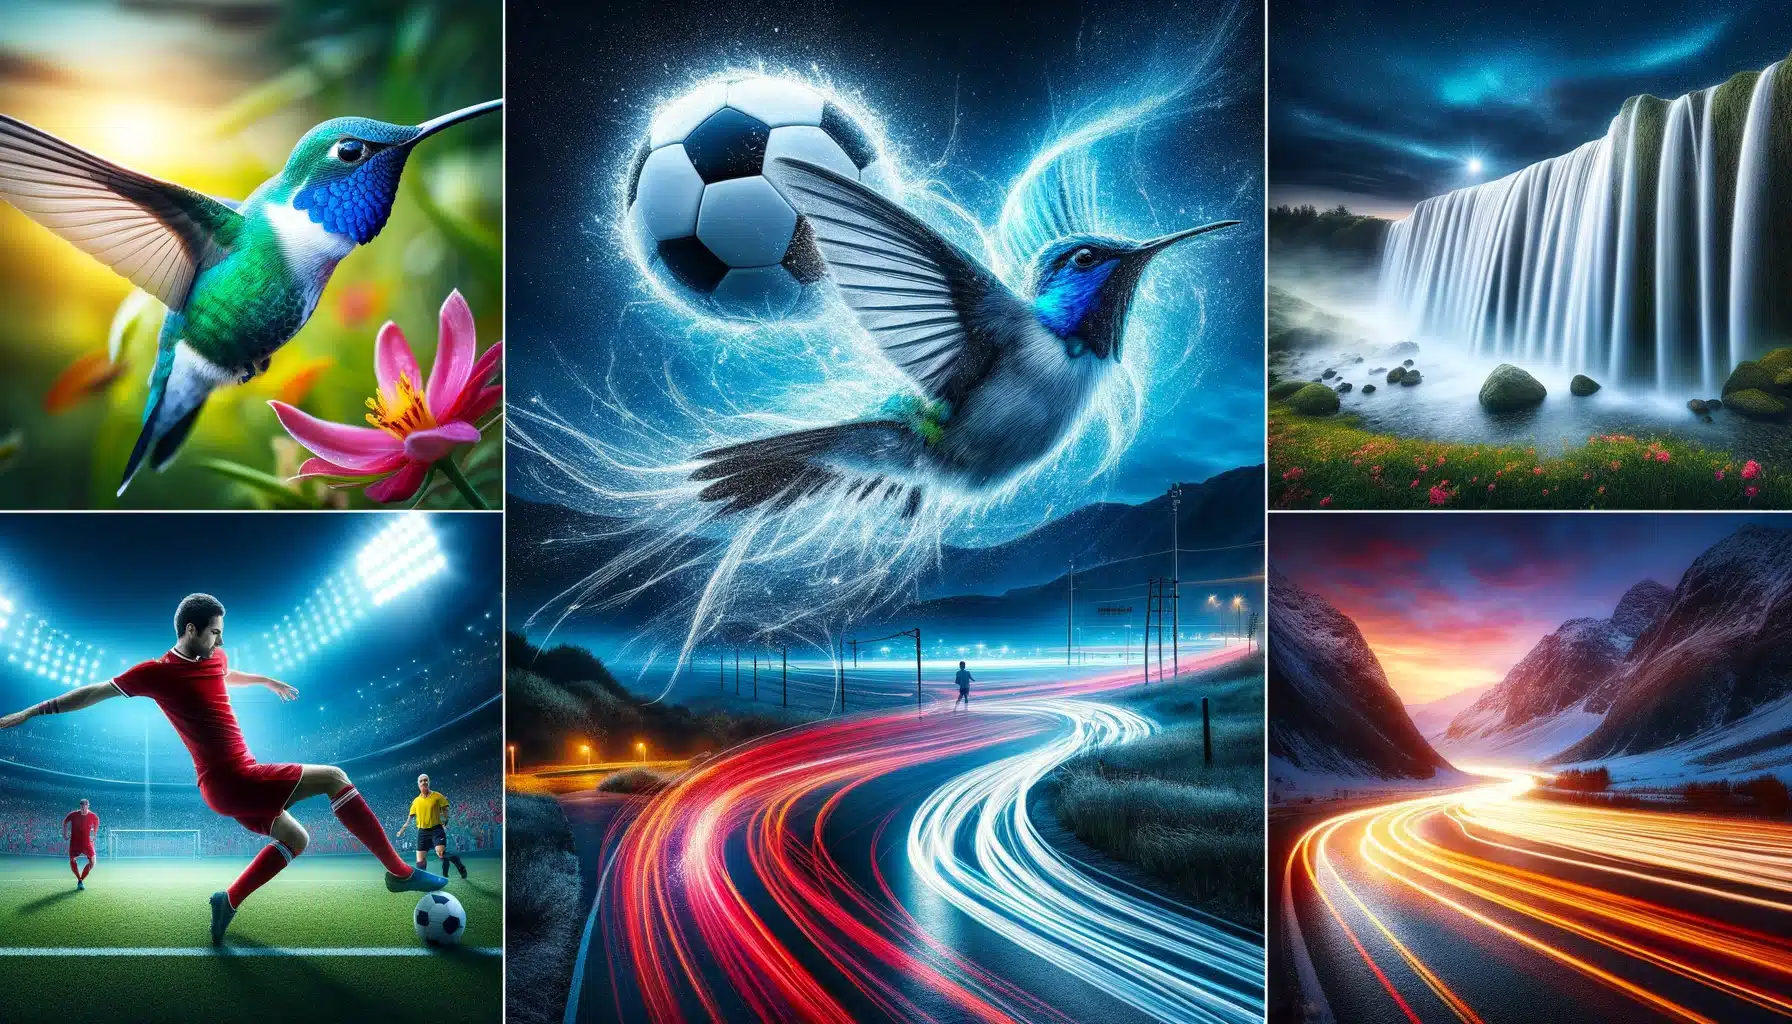 A montage showcasing the effects of shutter speed in photography: a frozen hummingbird, a soccer player mid-kick, a silky waterfall, and nighttime car light trails.